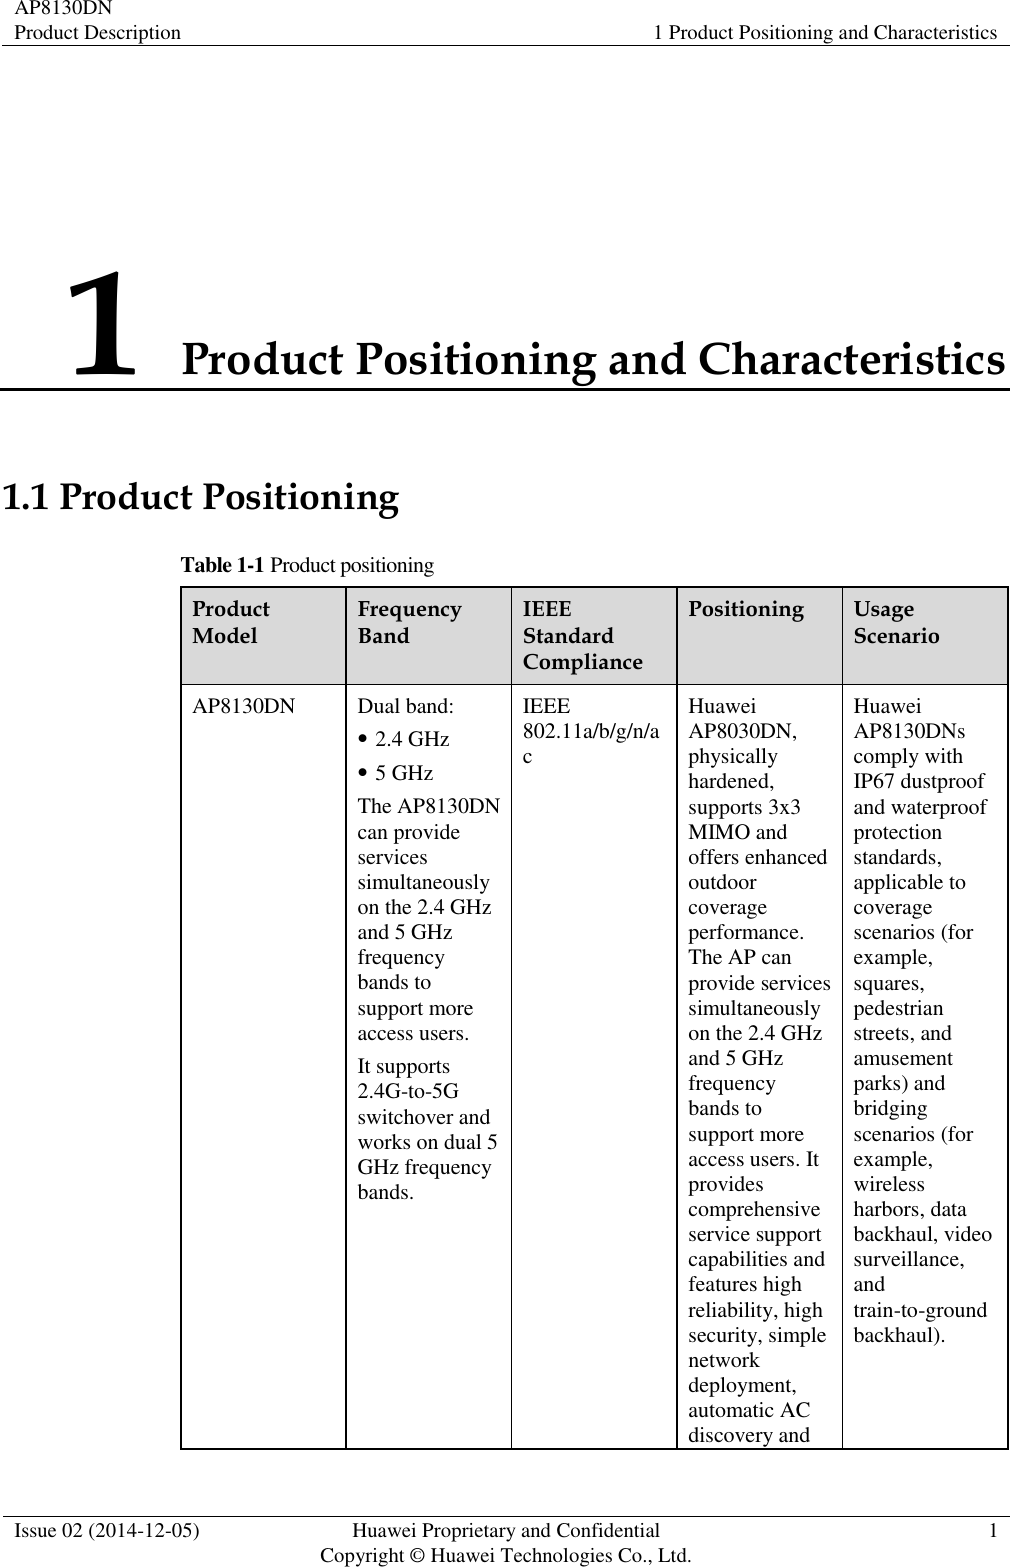 AP8130DN Product Description 1 Product Positioning and Characteristics  Issue 02 (2014-12-05) Huawei Proprietary and Confidential                                     Copyright © Huawei Technologies Co., Ltd. 1  1 Product Positioning and Characteristics 1.1 Product Positioning Table 1-1 Product positioning Product Model Frequency Band IEEE Standard Compliance Positioning Usage Scenario AP8130DN Dual band:  2.4 GHz  5 GHz The AP8130DN can provide services simultaneously on the 2.4 GHz and 5 GHz frequency bands to support more access users. It supports 2.4G-to-5G switchover and works on dual 5 GHz frequency bands. IEEE 802.11a/b/g/n/ac Huawei AP8030DN, physically hardened, supports 3x3 MIMO and offers enhanced outdoor coverage performance. The AP can provide services simultaneously on the 2.4 GHz and 5 GHz frequency bands to support more access users. It provides comprehensive service support capabilities and features high reliability, high security, simple network deployment, automatic AC discovery and Huawei AP8130DNs comply with IP67 dustproof and waterproof protection standards, applicable to coverage scenarios (for example, squares, pedestrian streets, and amusement parks) and bridging scenarios (for example, wireless harbors, data backhaul, video surveillance, and train-to-ground backhaul). 